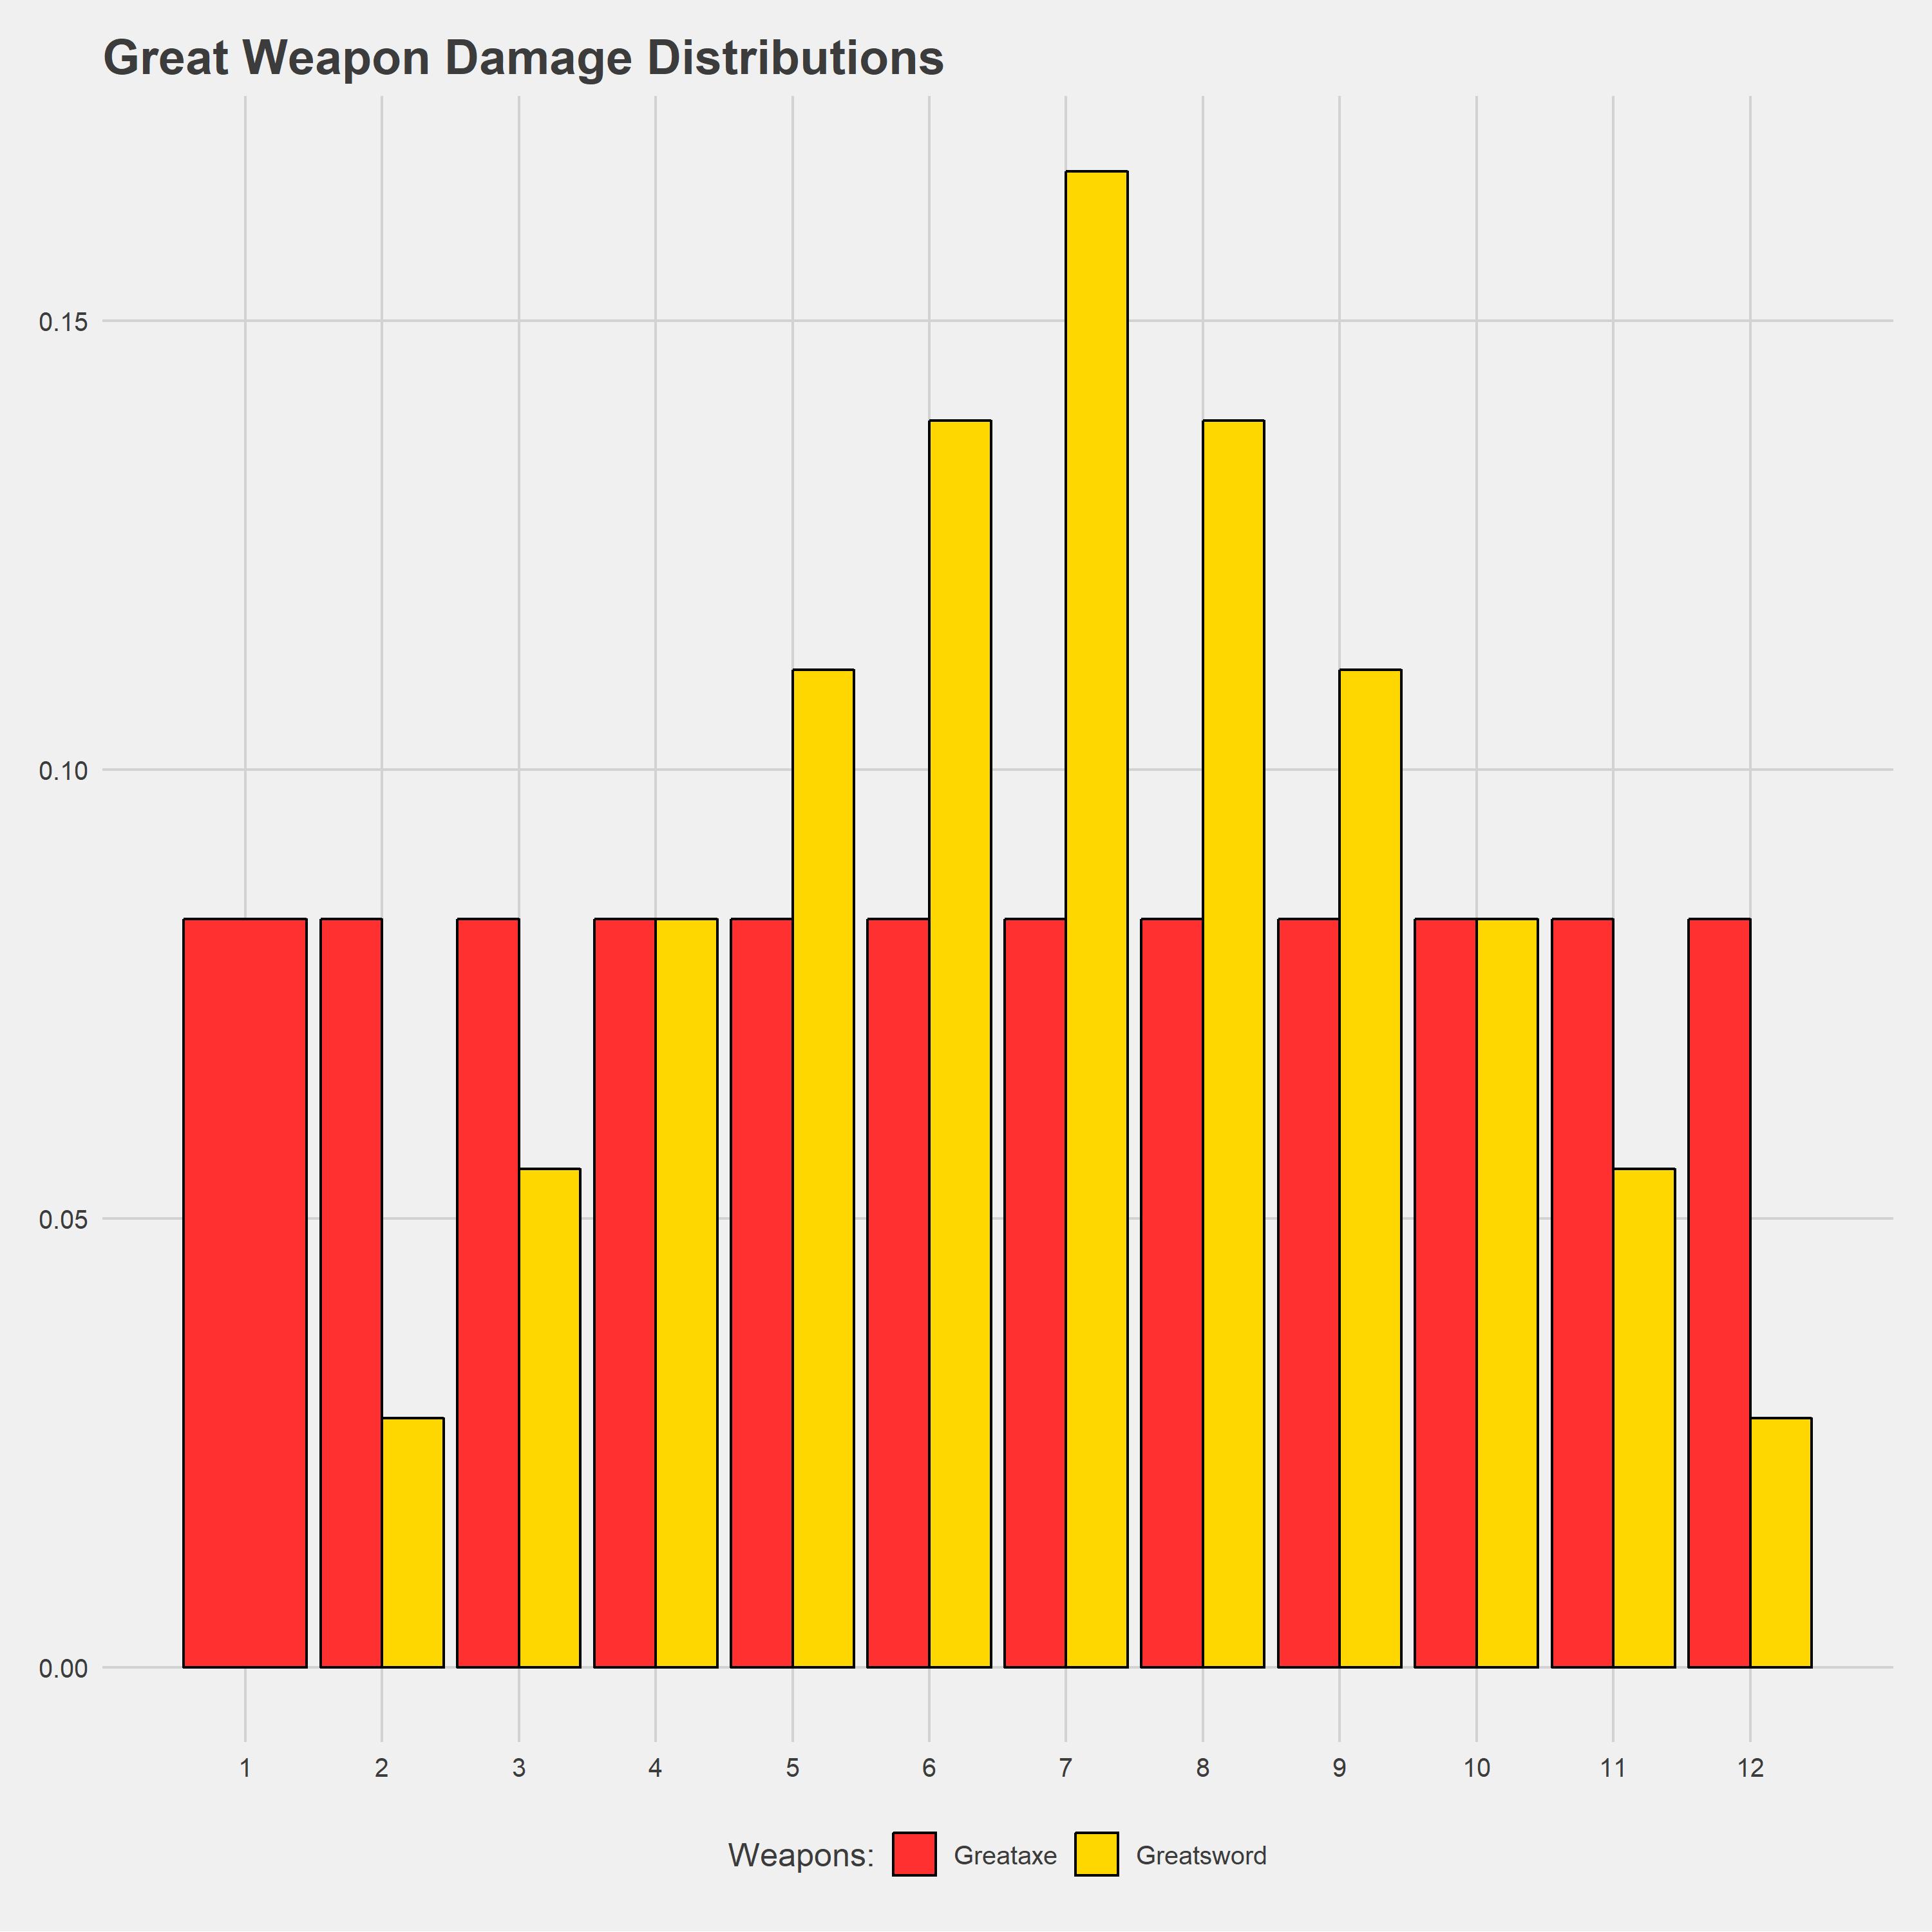 Weapon Damage Distribution of the Great Weapons